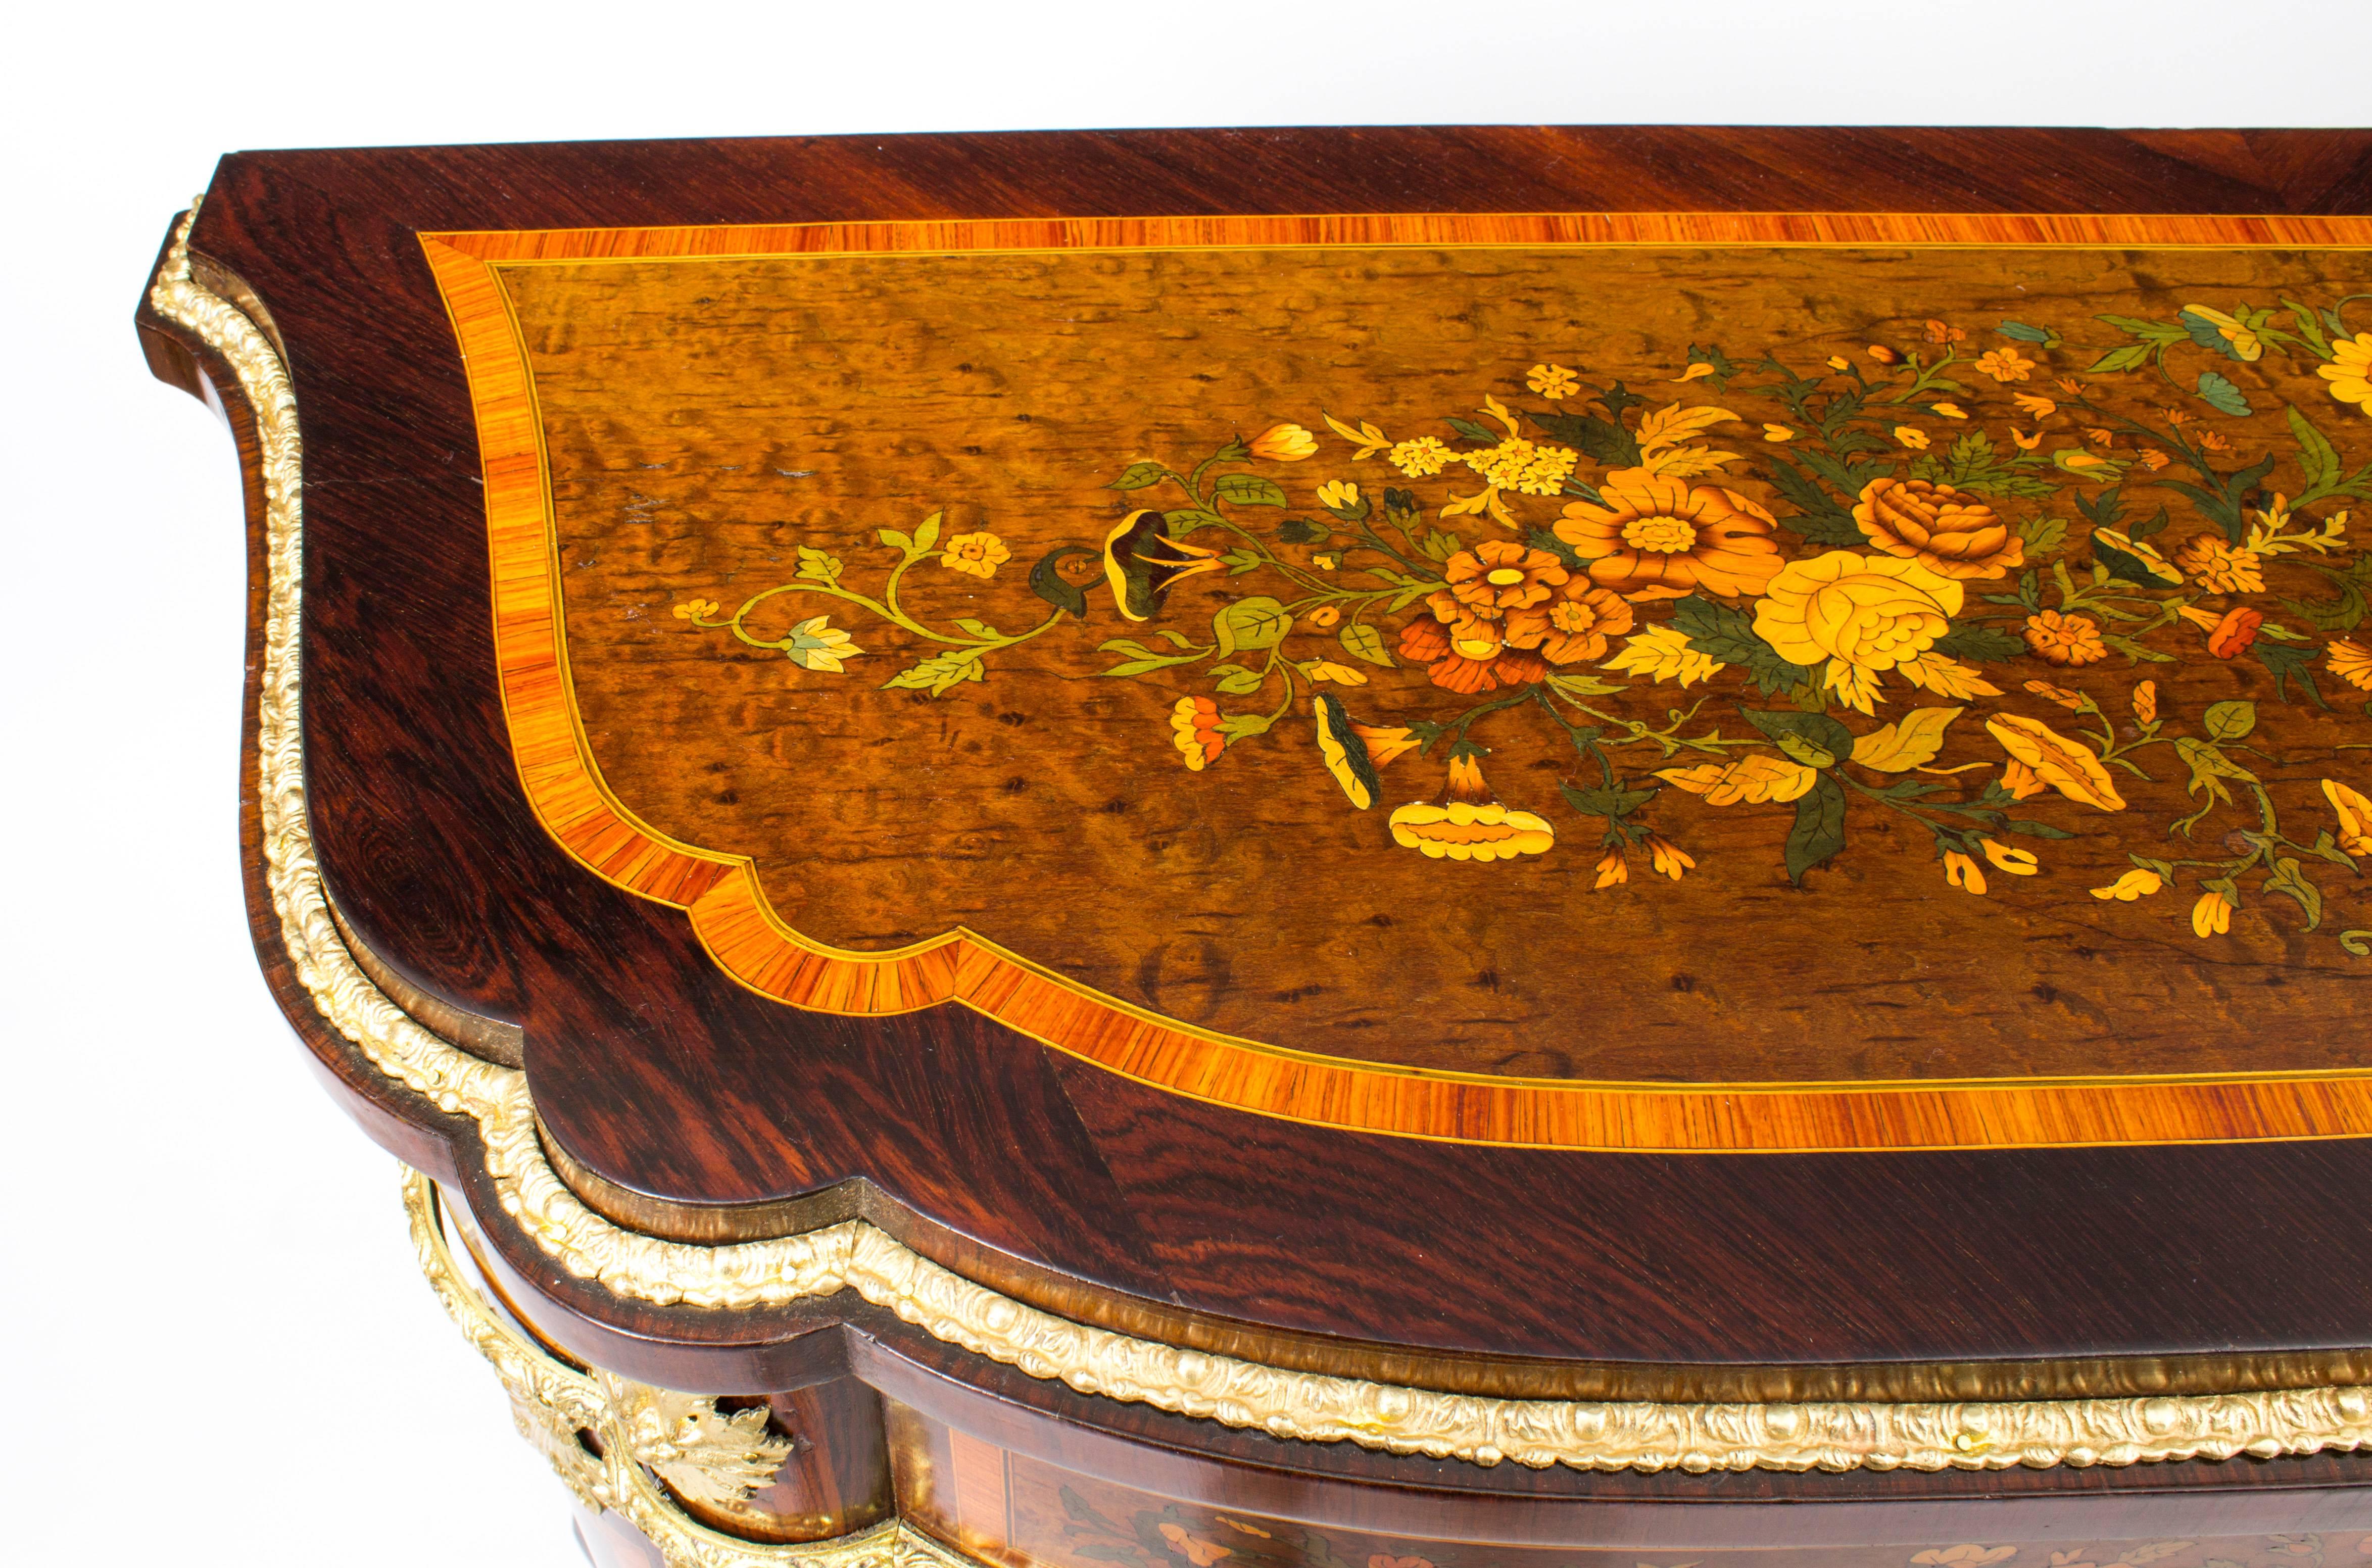 This is a stunning and imposing antique French ormolu-mounted, amboyna, marquetry. gonzalo alves and walnut side cabinet, circa 1850 in date.

The entire piece highlights the unique and truly exceptional pattern of the floral marquetry which is set